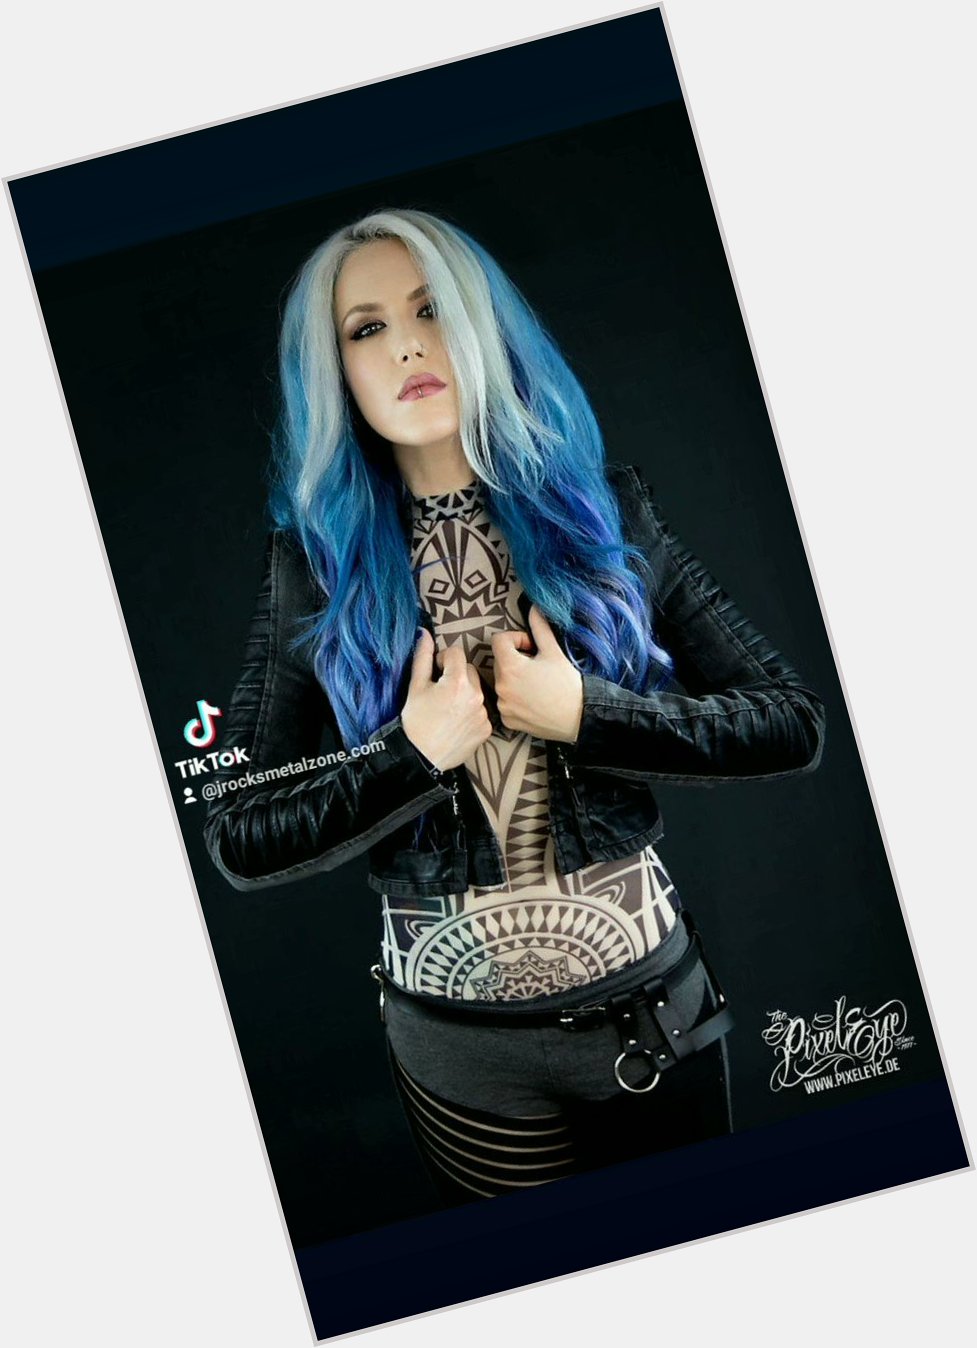 Happy birthday Alissa White-Gluz 

July 31, 1985

What\s your favorite Arch Enemy track? 

 